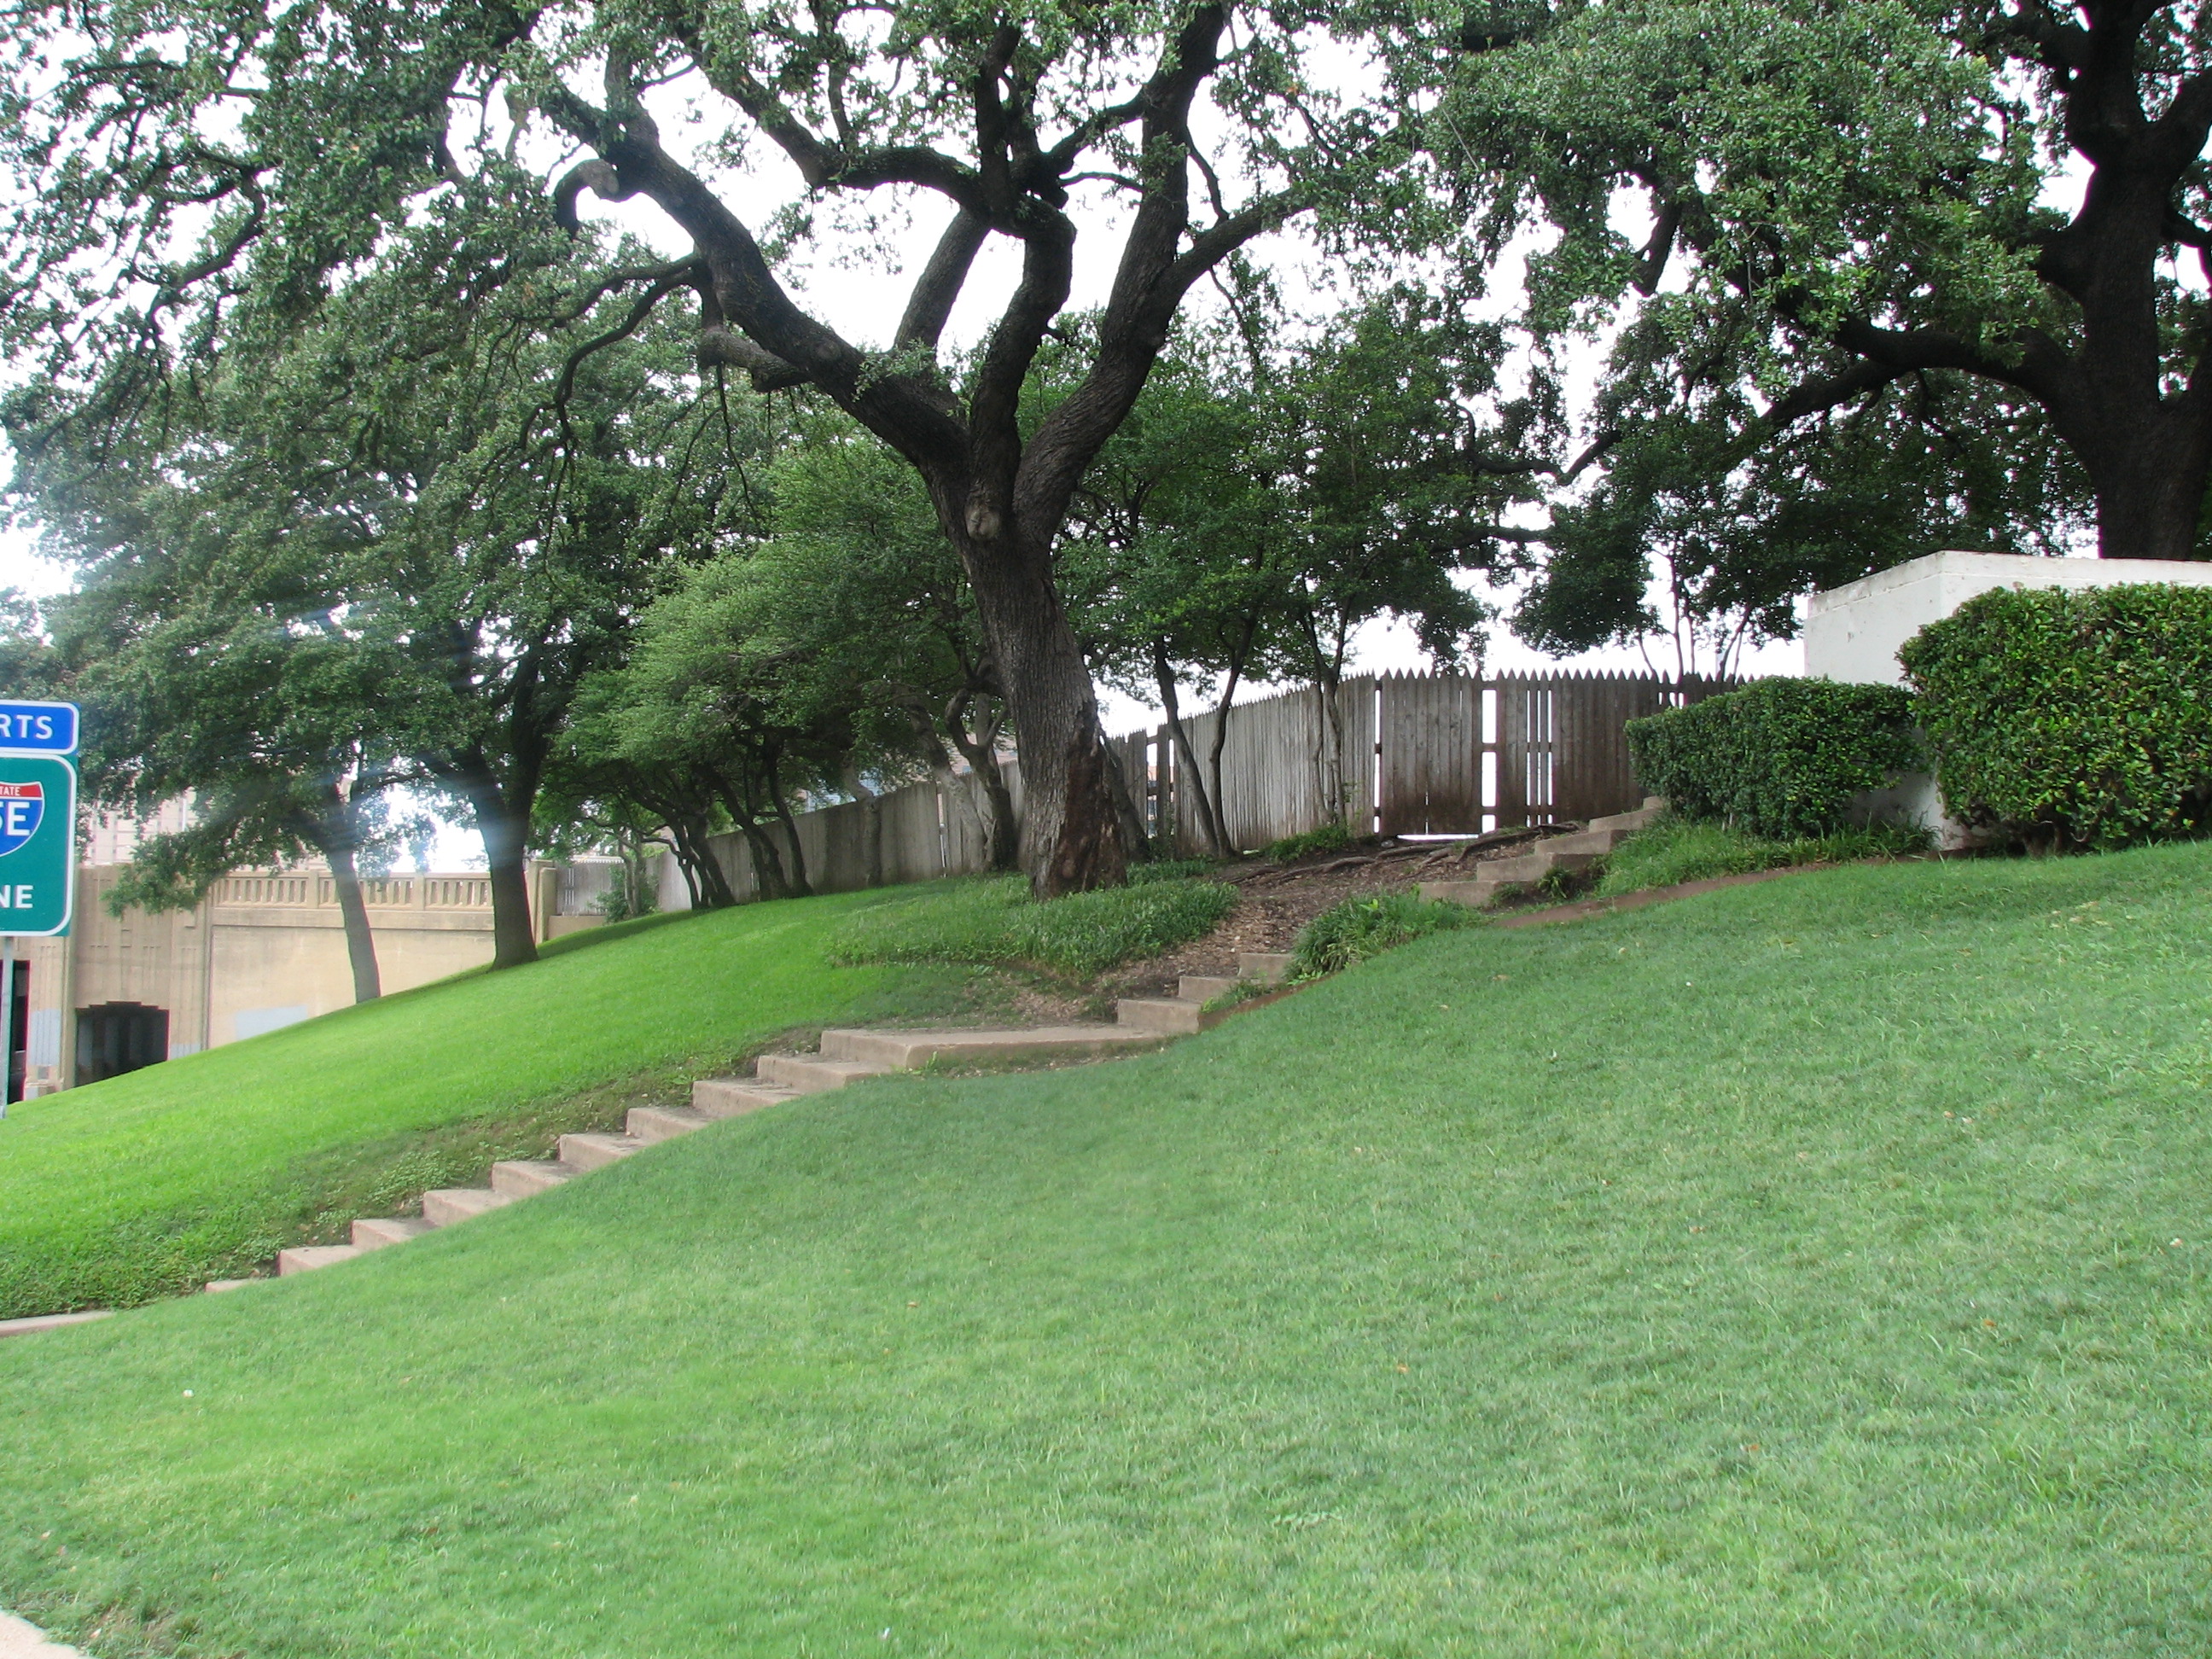 Grassy Knoll from the street view | Pics4Learning